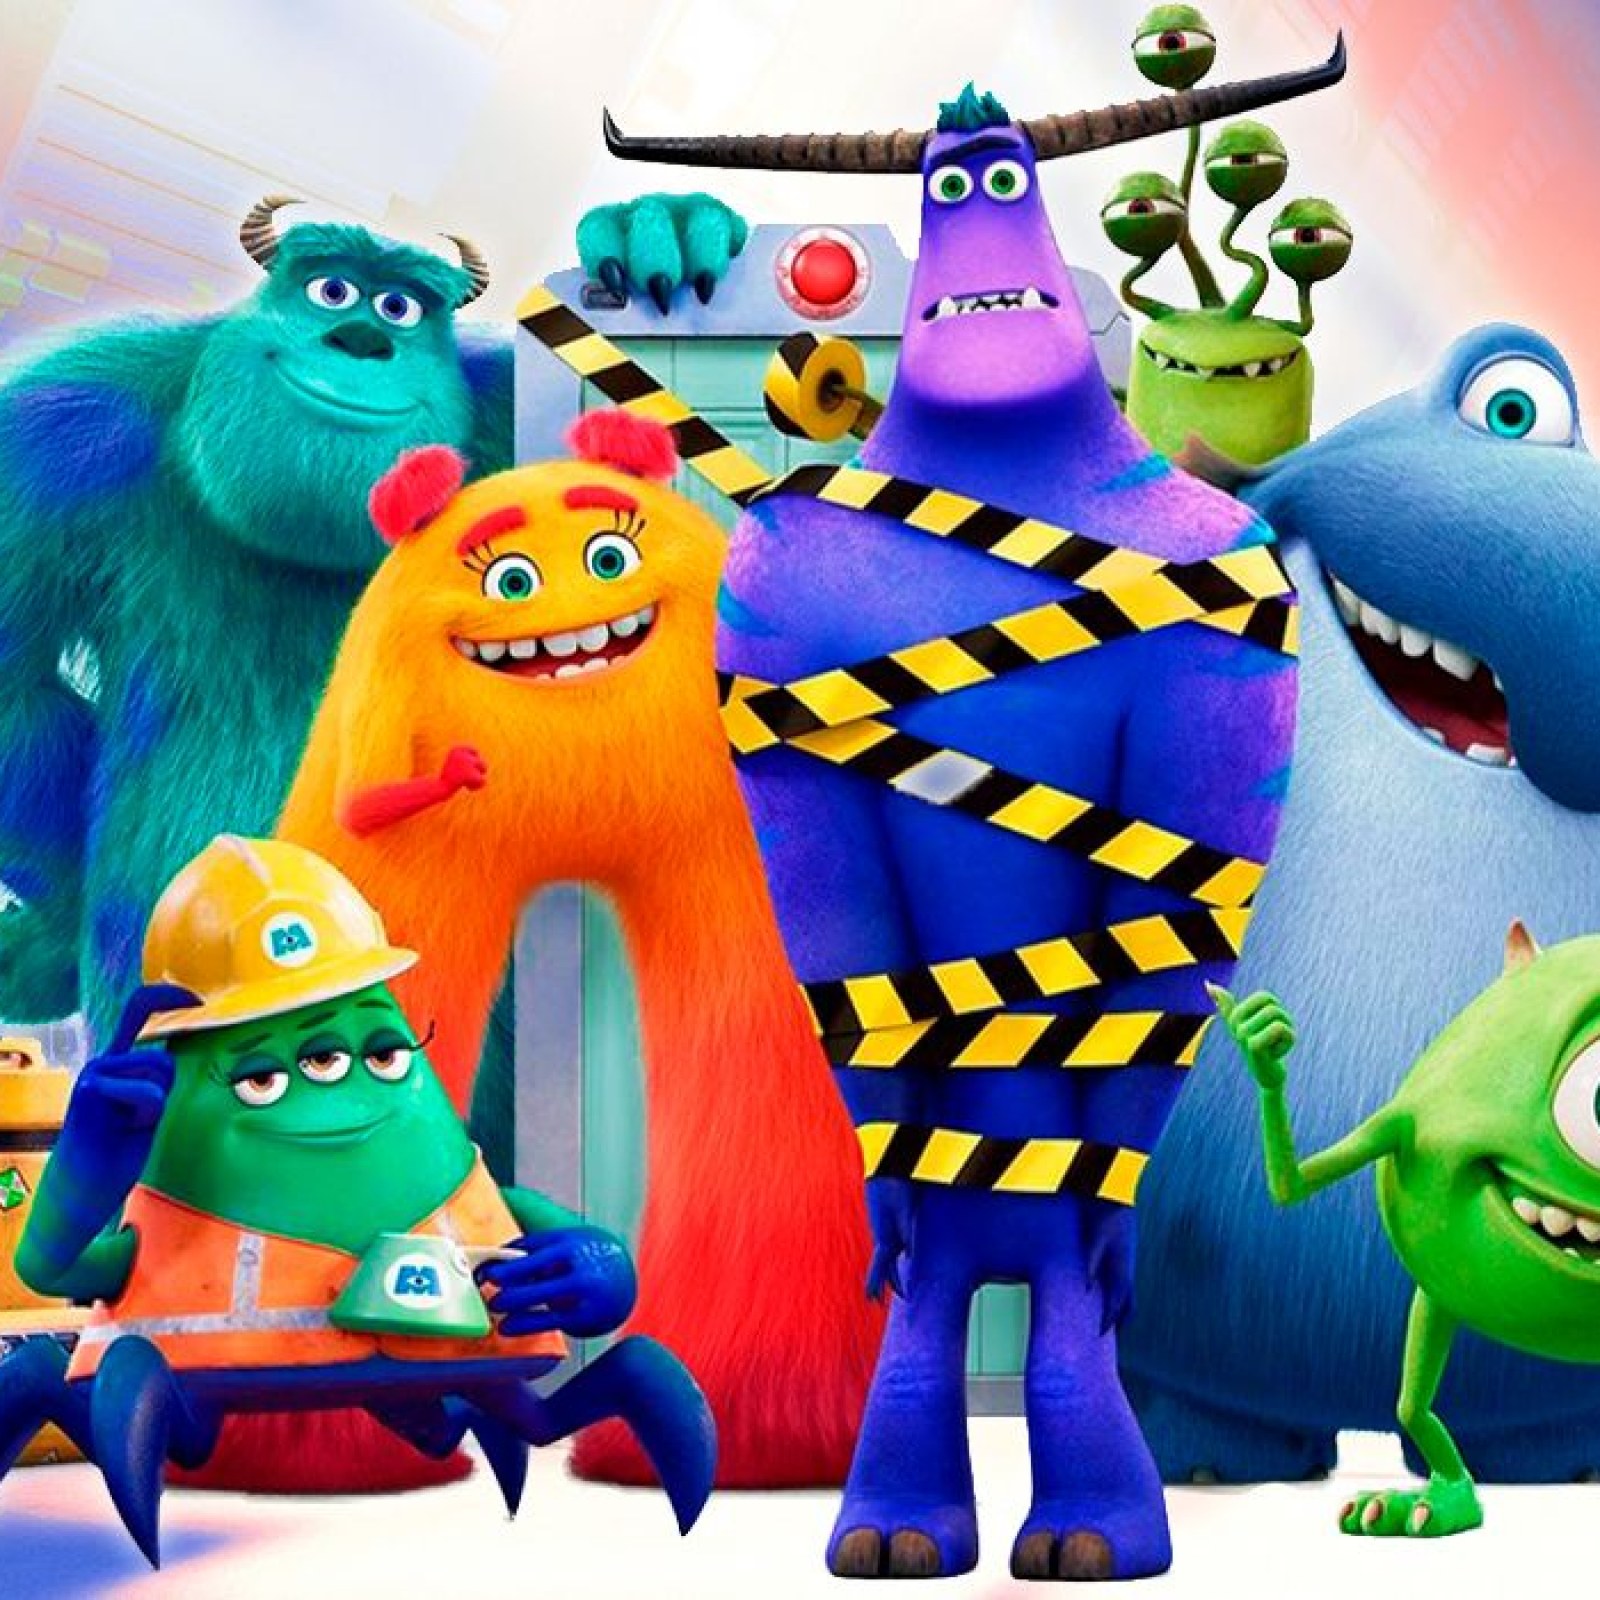 First-look character images from Pixar's Monsters, Inc. sequel series  Monsters at Work